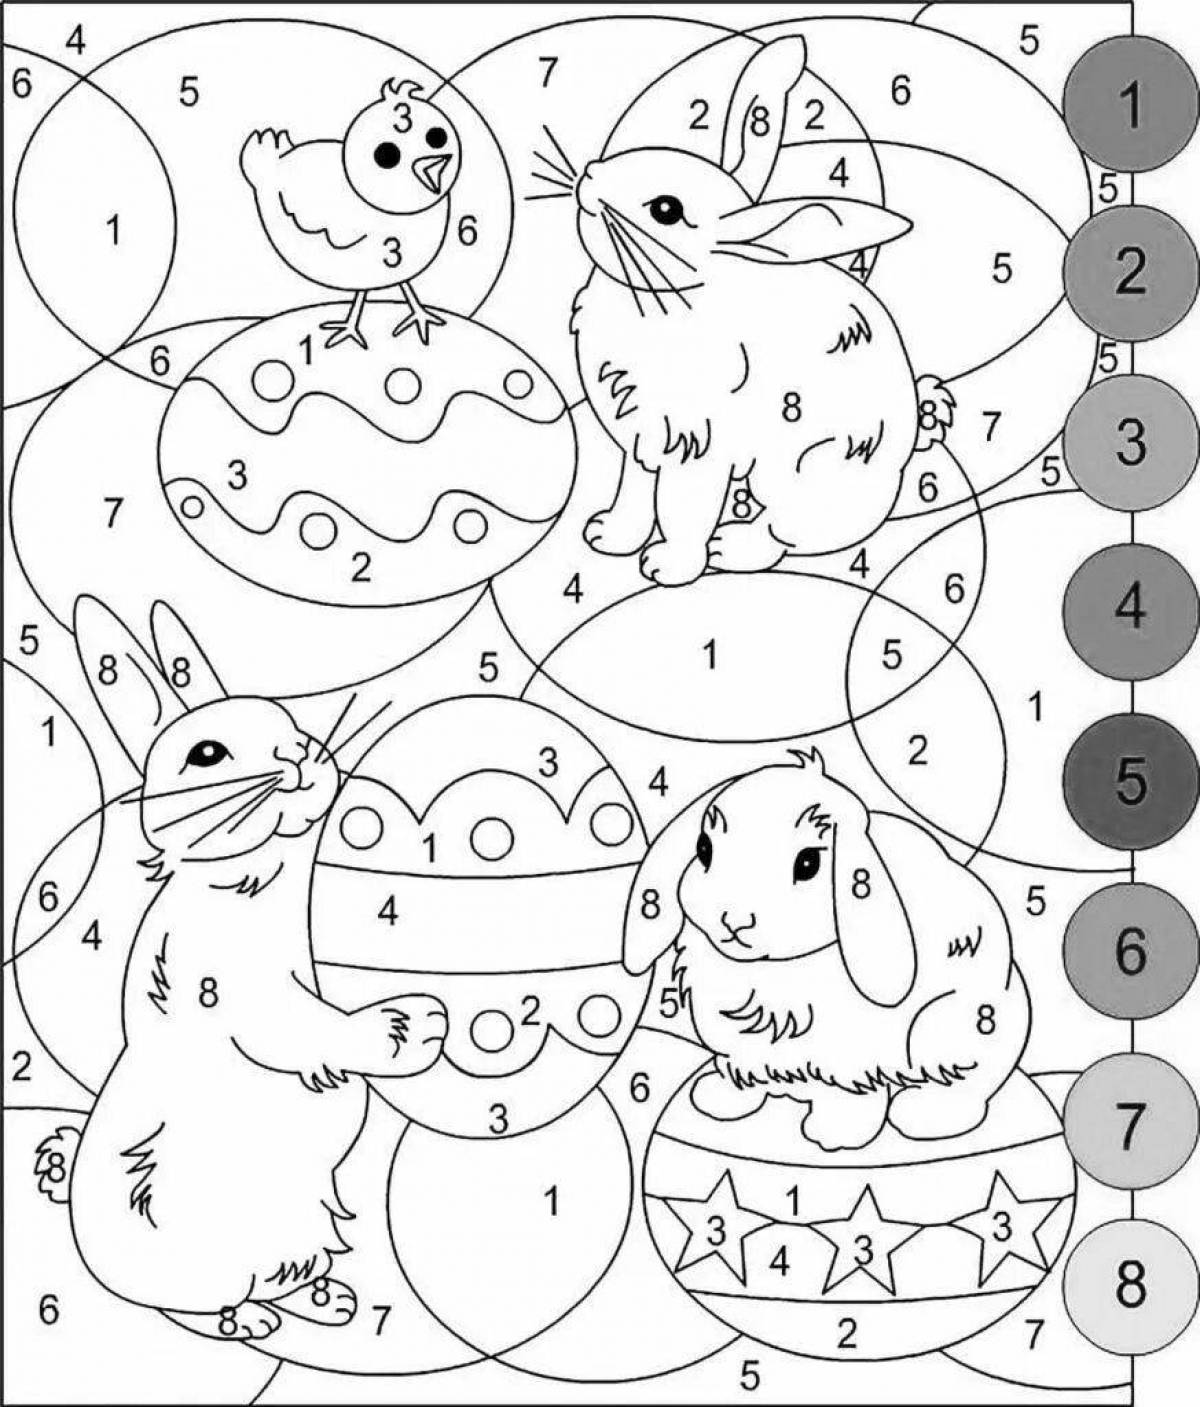 Charming coloring book what is the name of the number